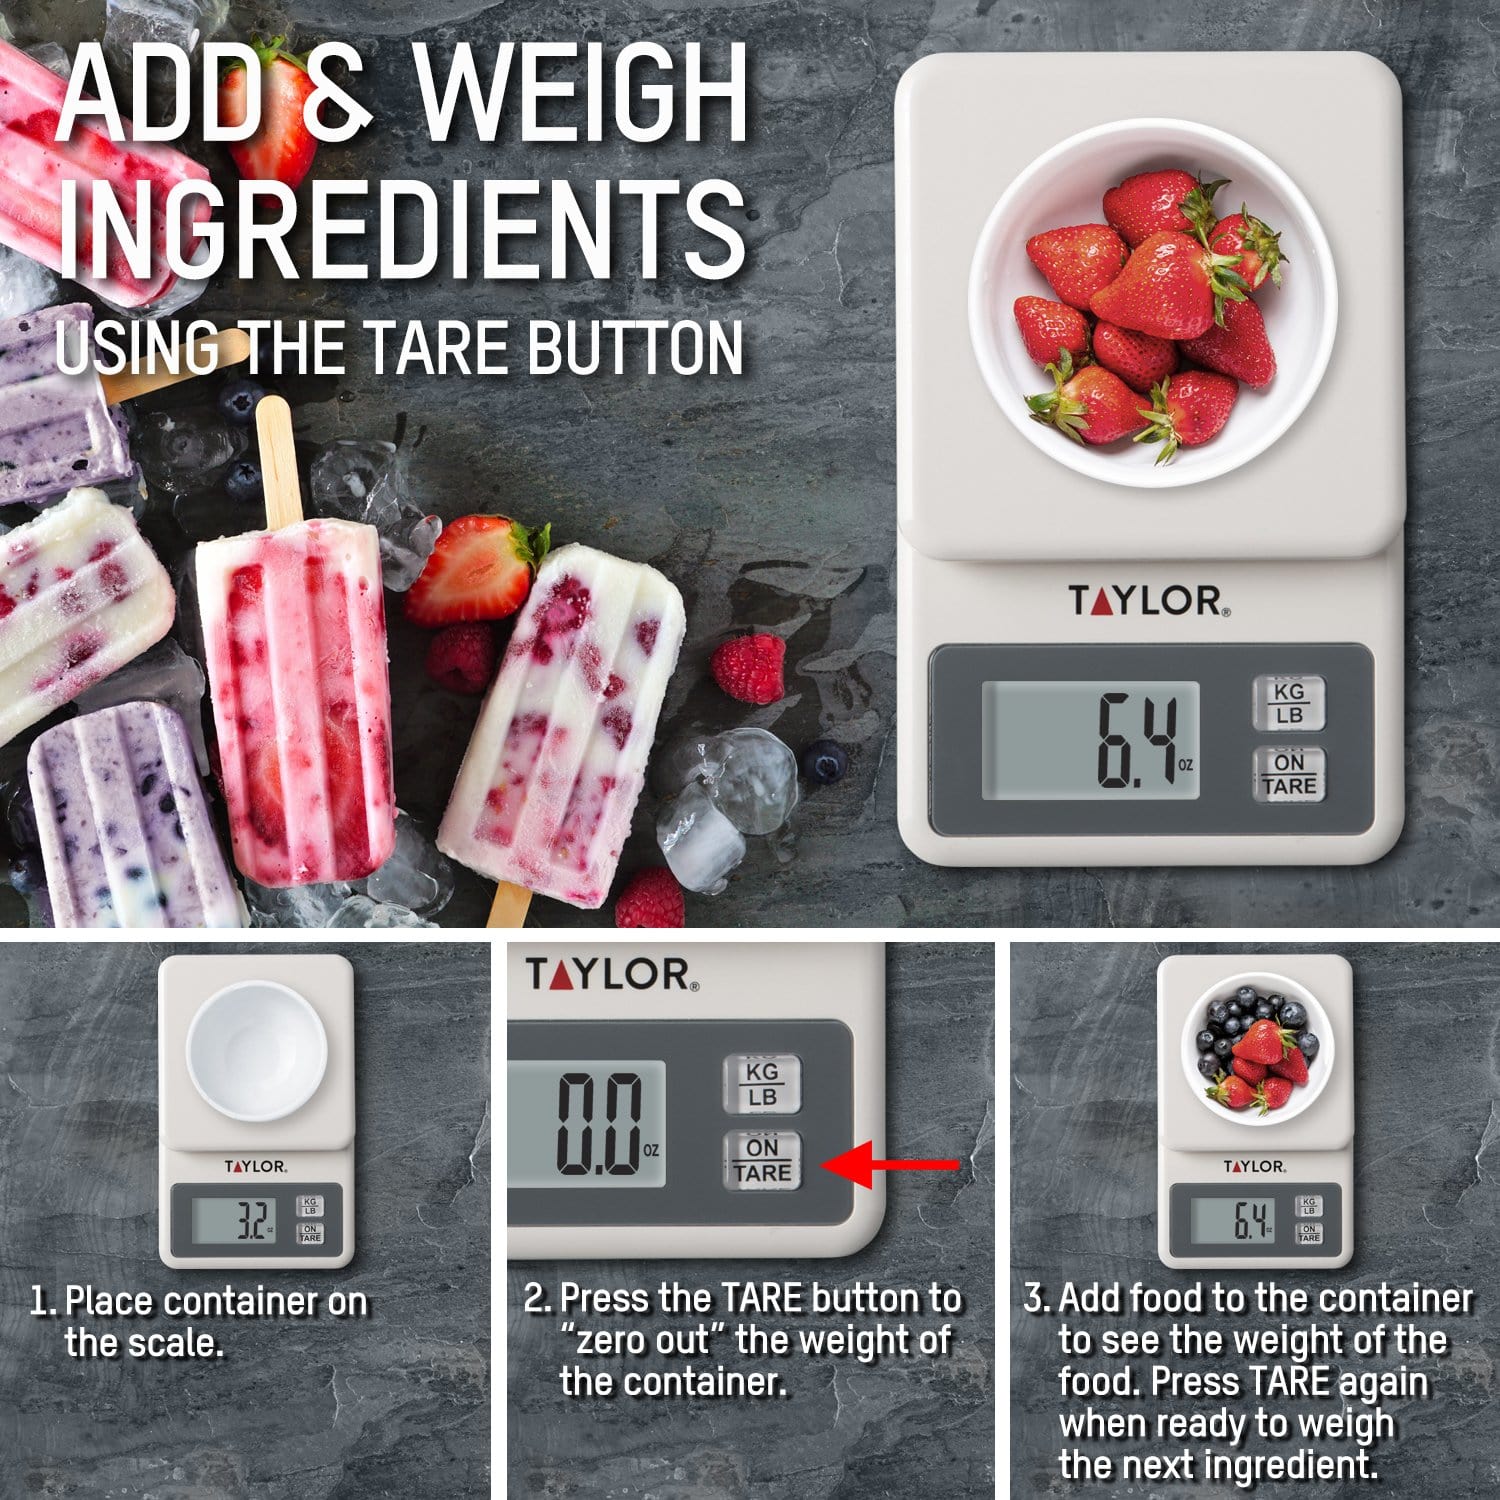 Compact Digital Portion Control Kitchen Scale